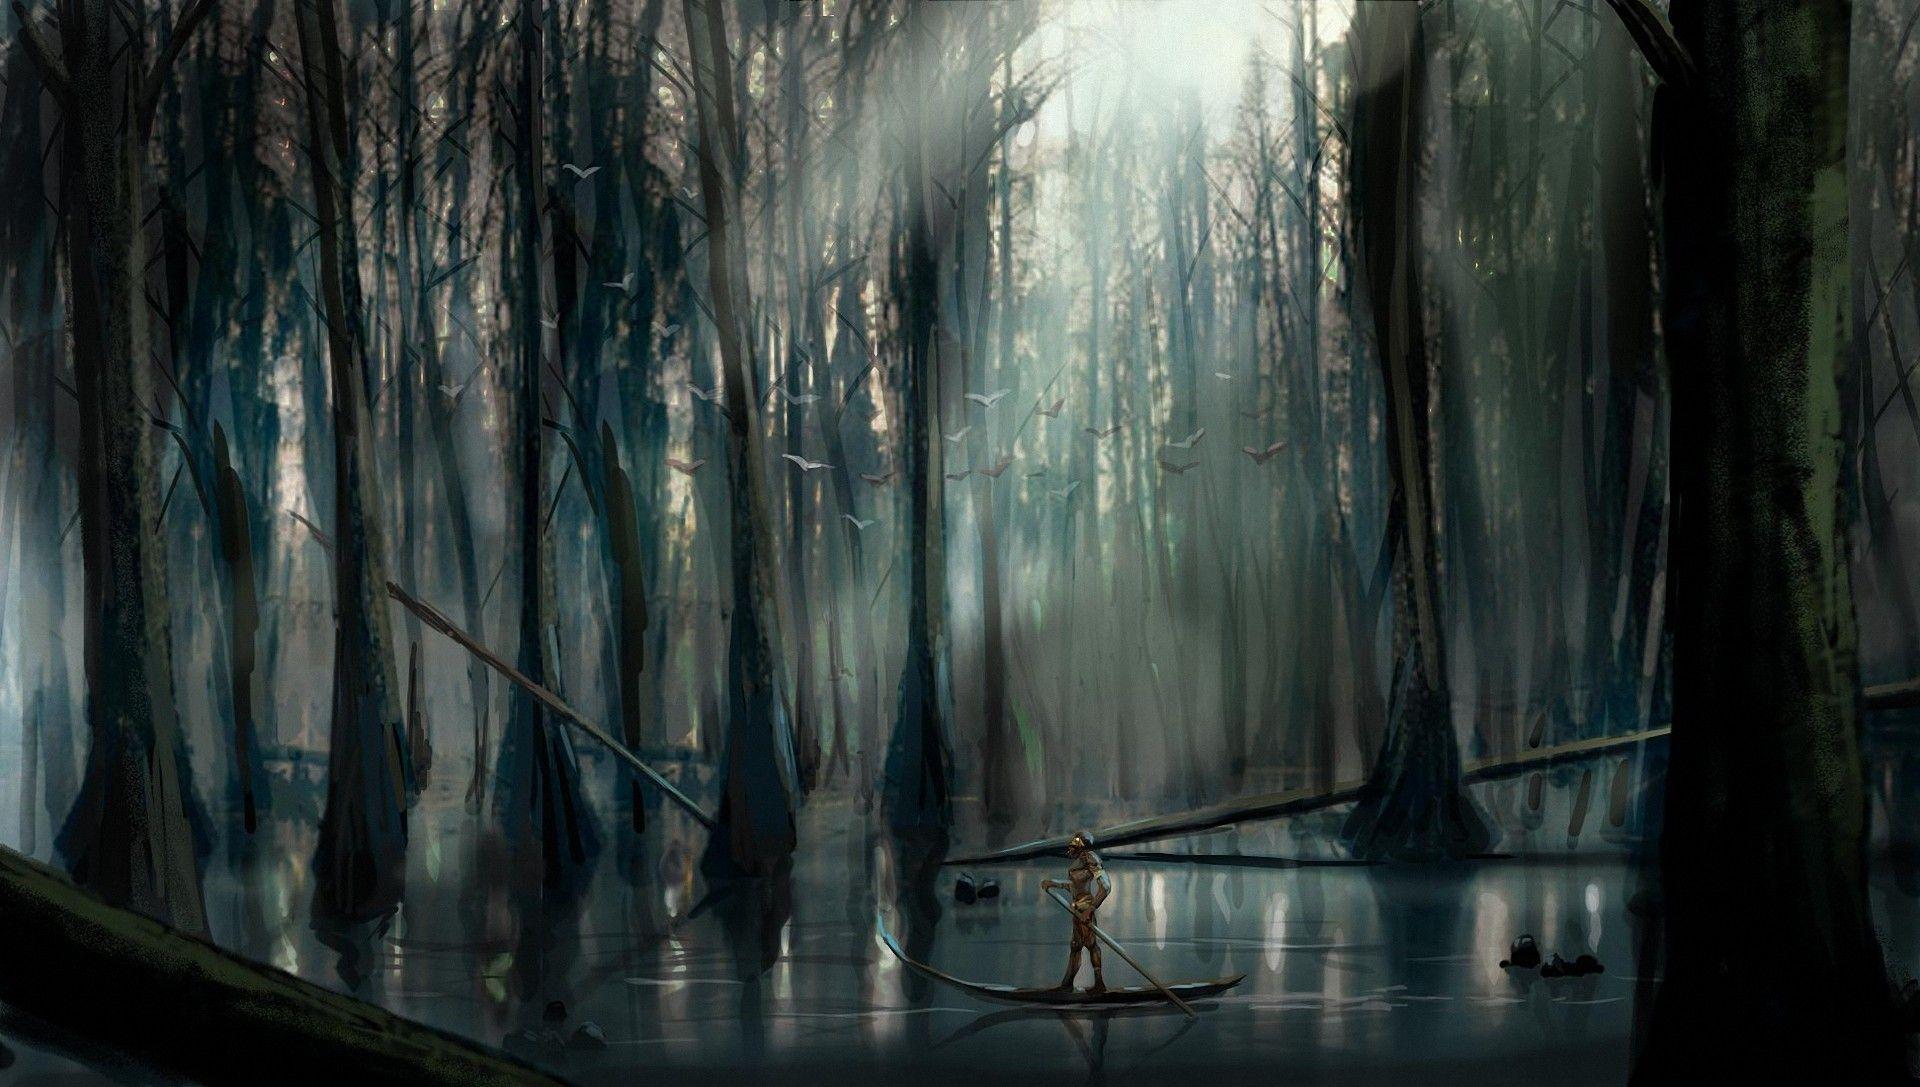 A boat trip in the dead forest wallpaper and image